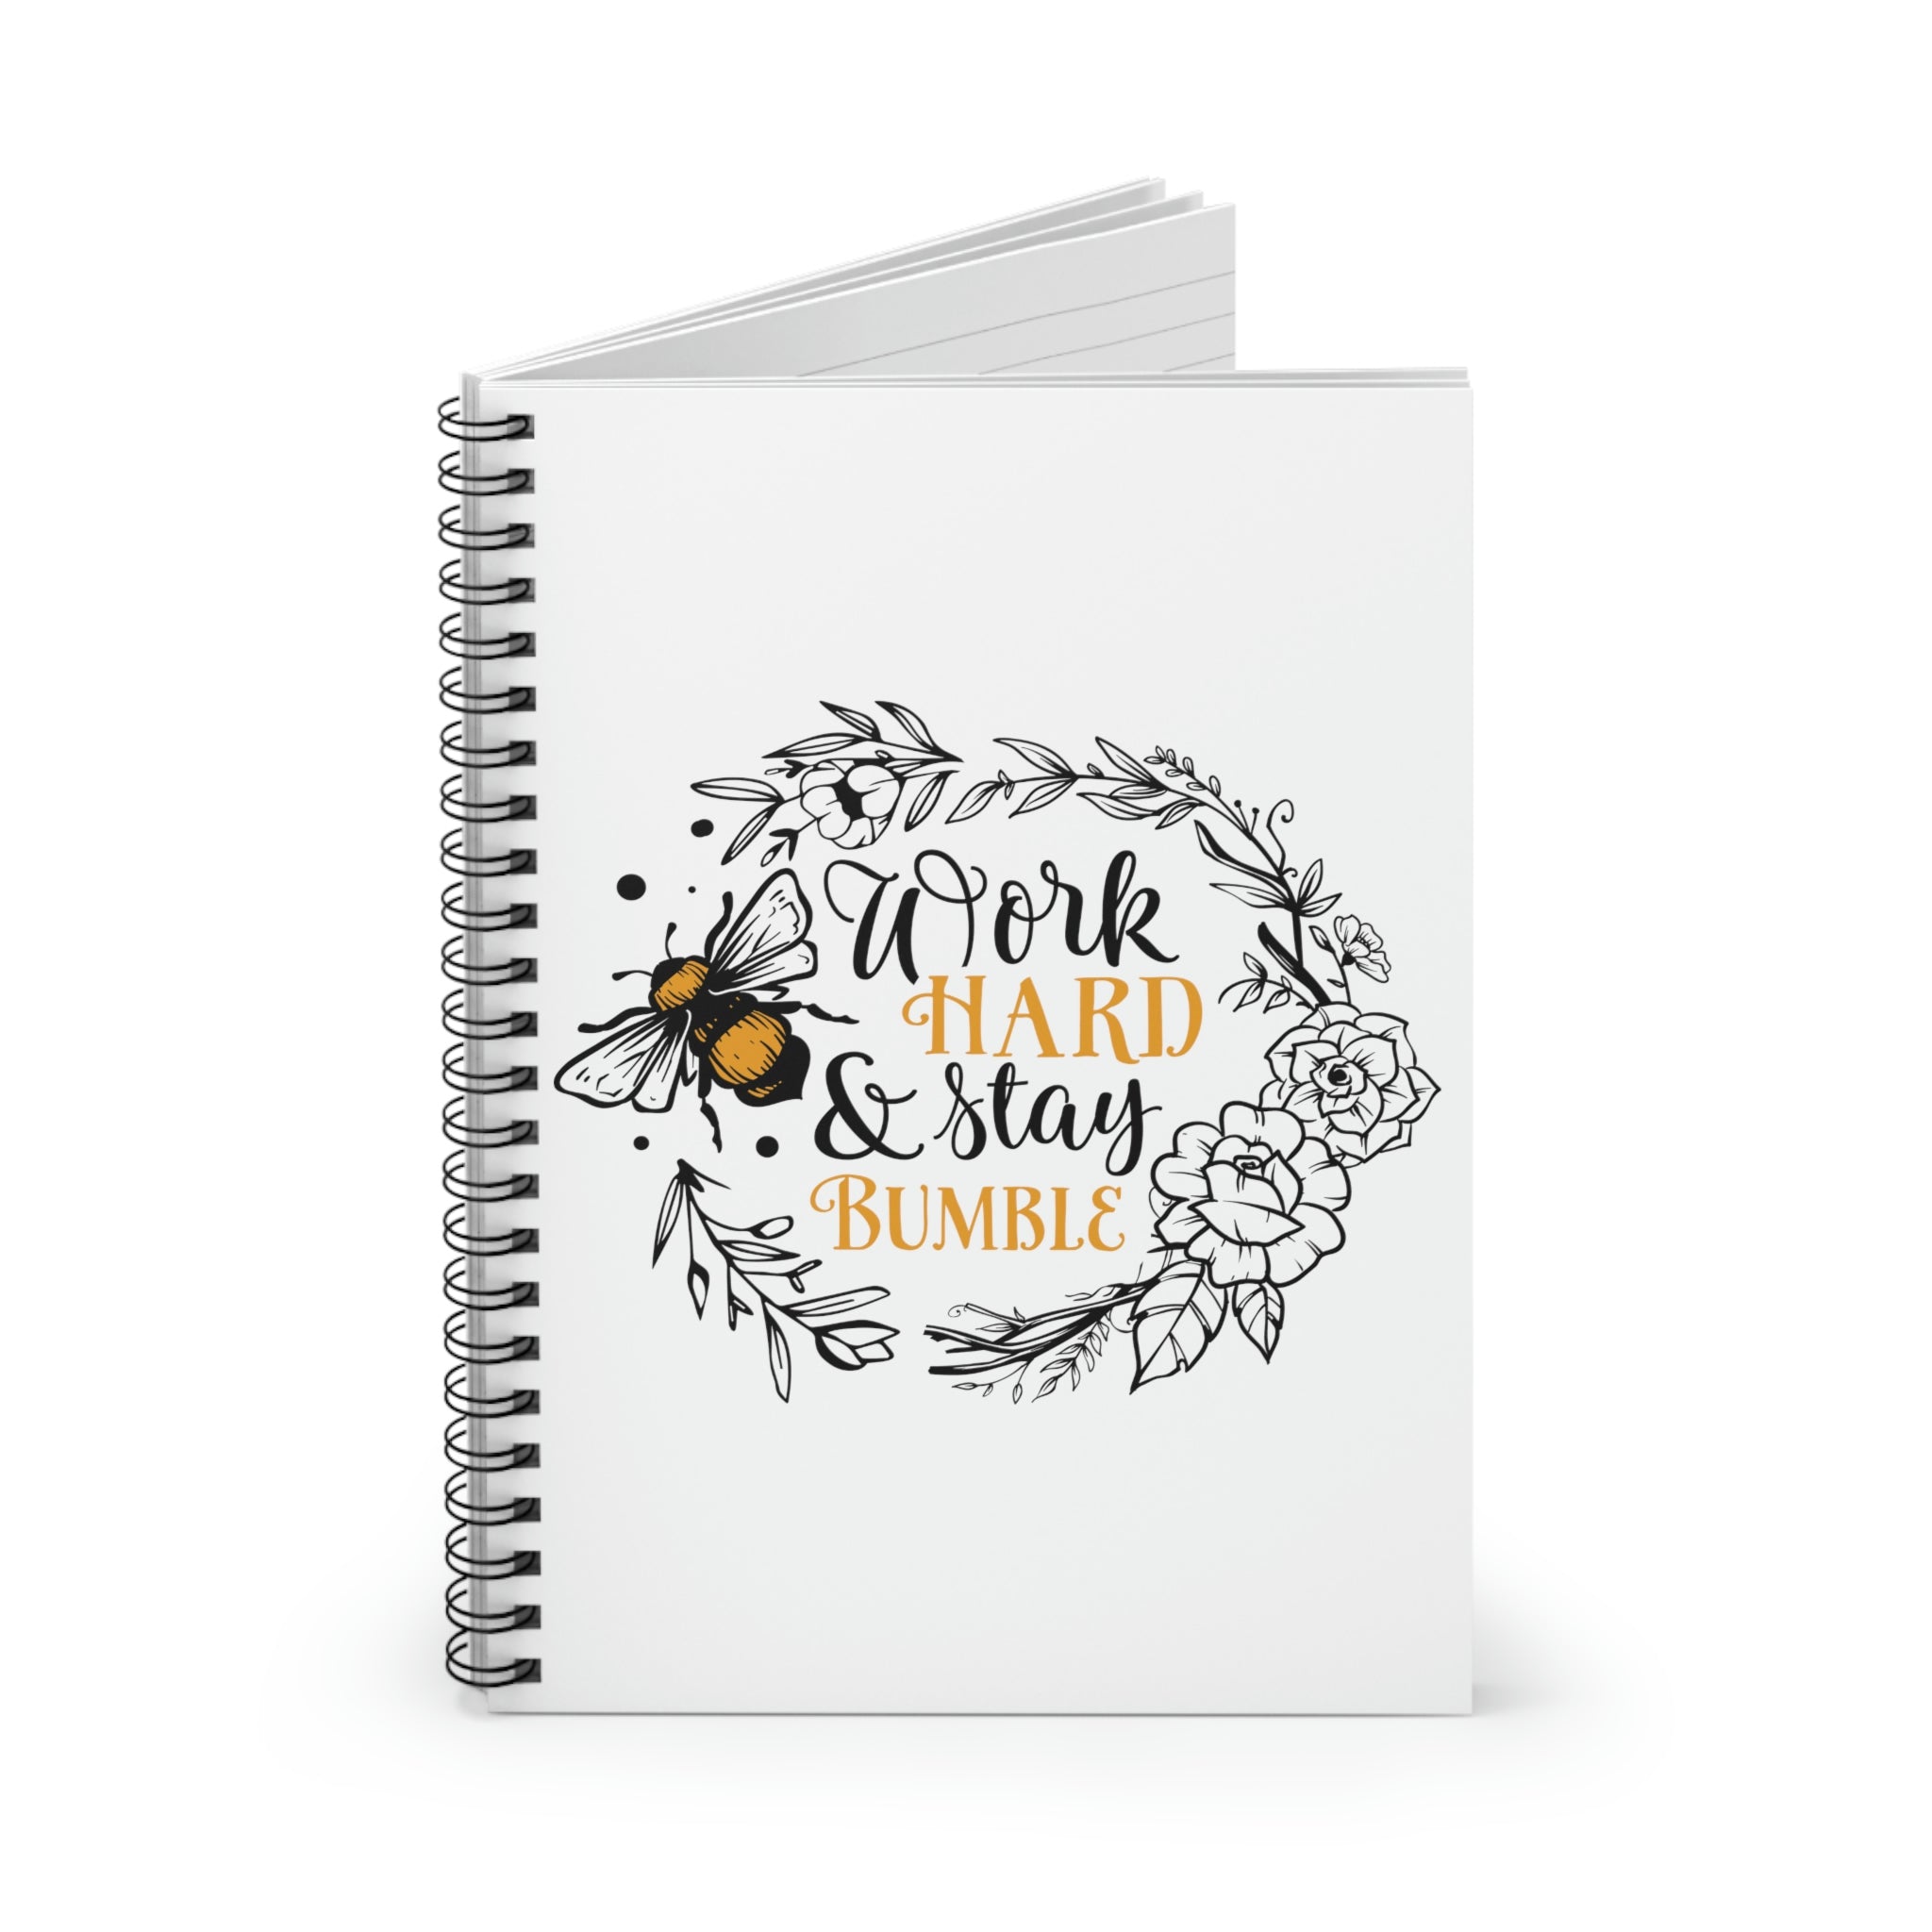 Stay Bumble Spiral Notebook - Ruled Line